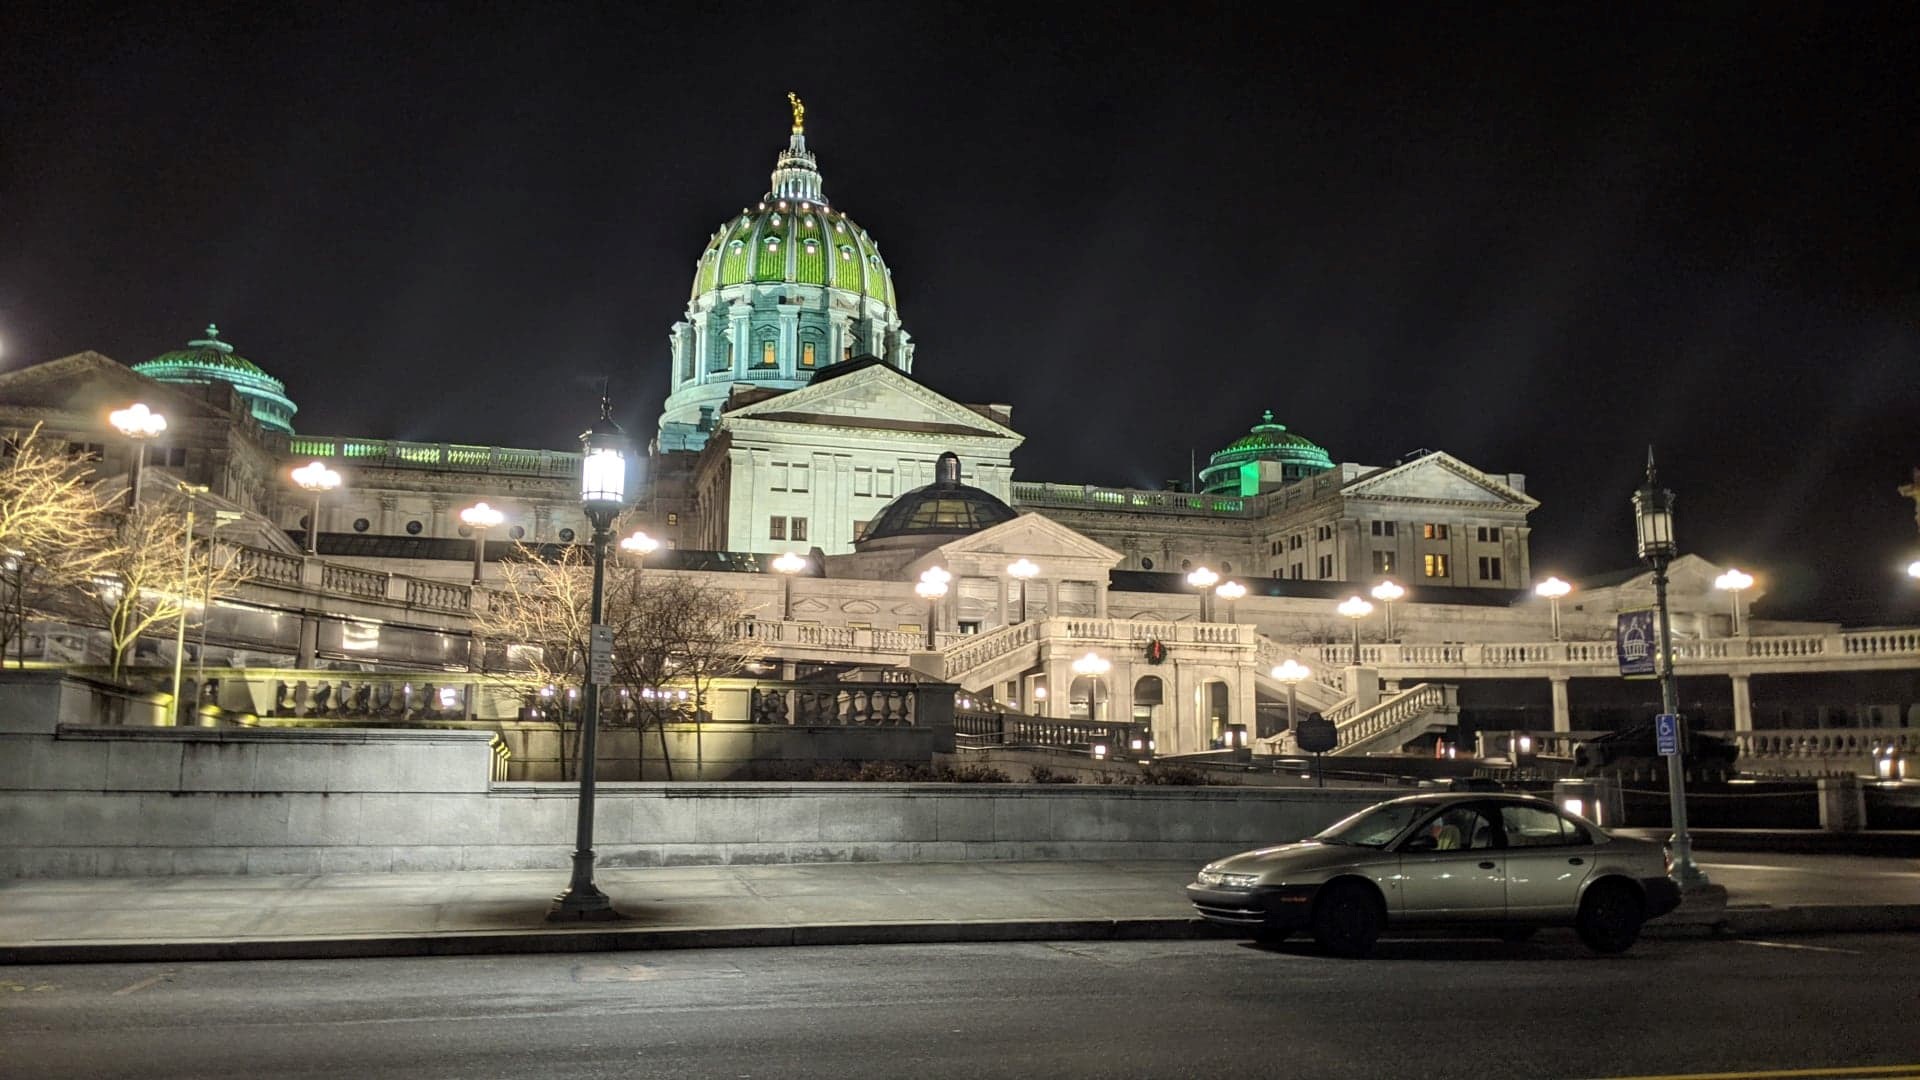 Pennsylvania State Police and Harrisburg Police offered an update on State Capitol security in Harrisburg.